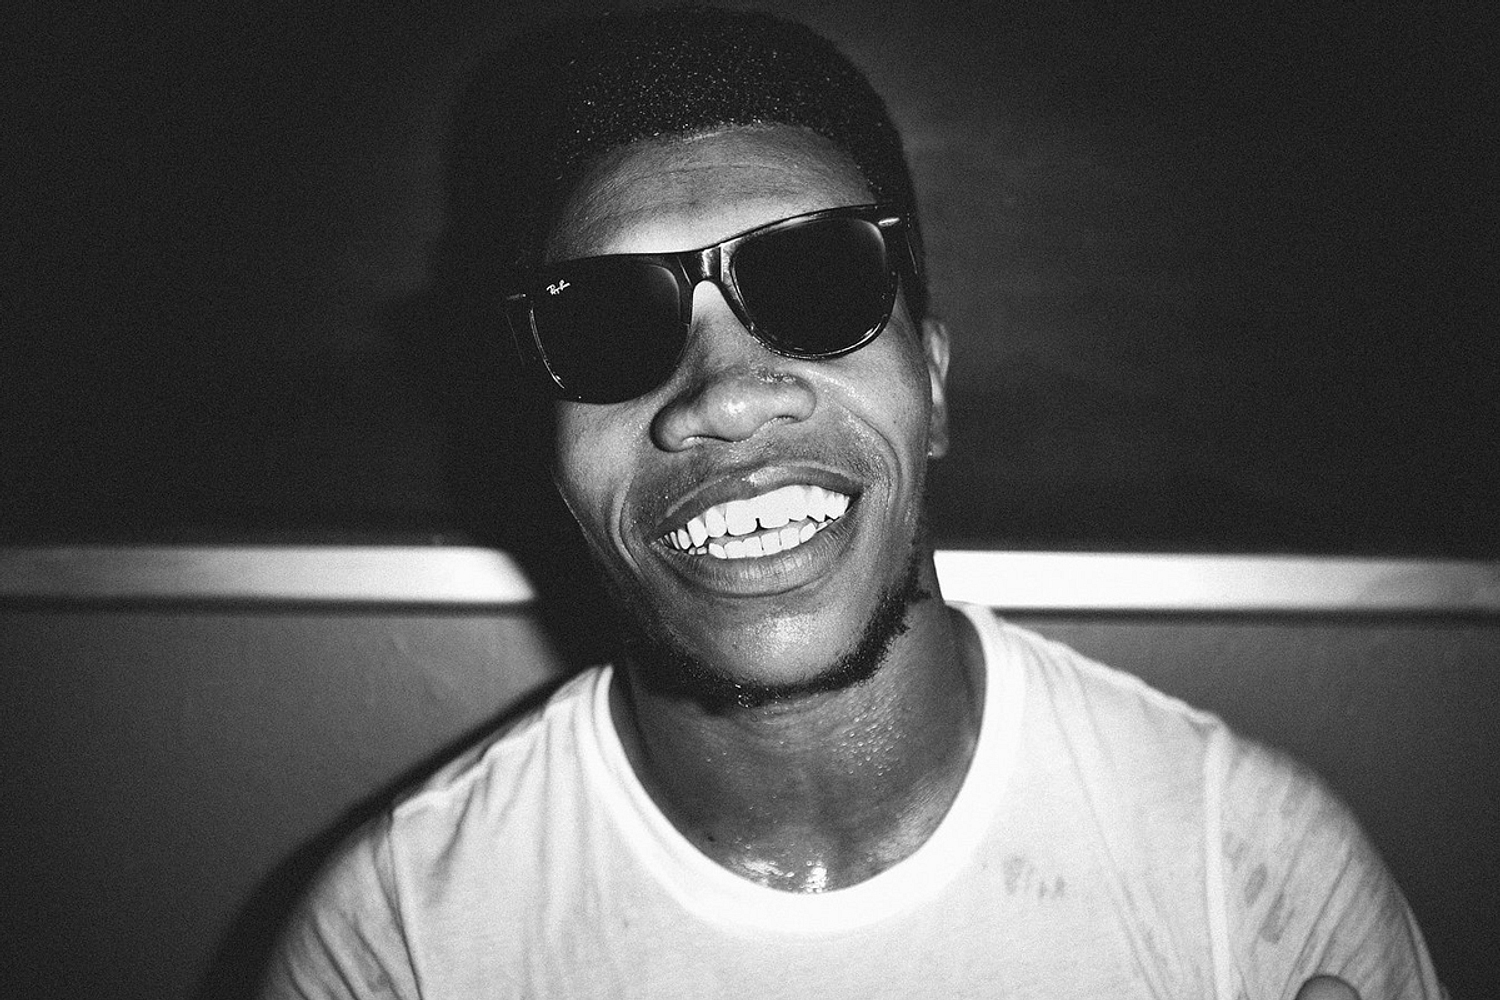 Willis Earl Beal opens up with his 'Traveling Eyes' video